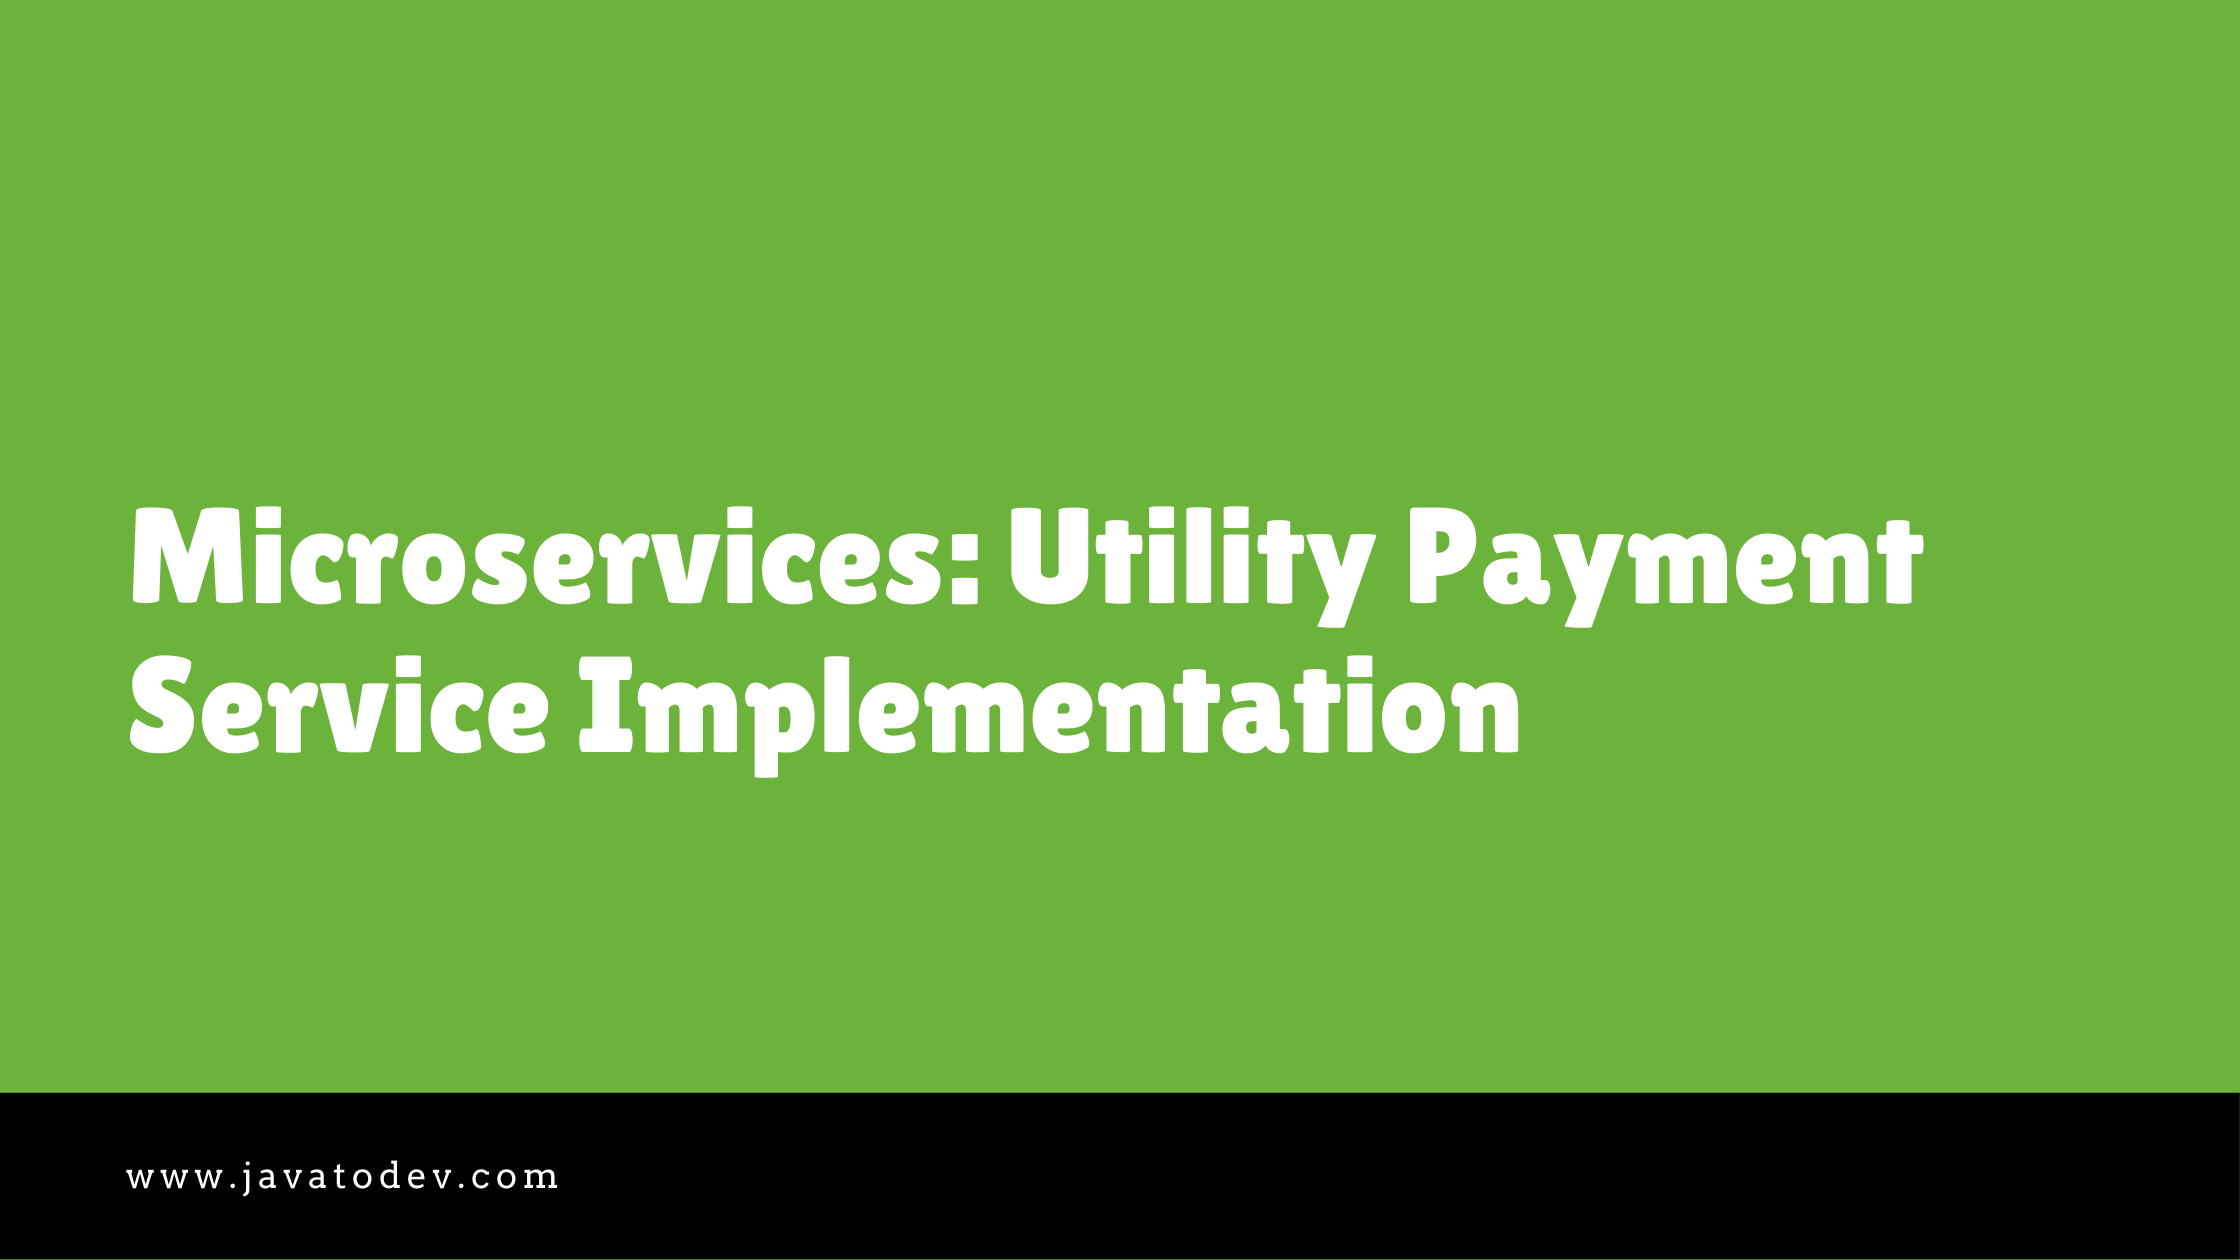 Microservices - Utility Payment Service Implementation